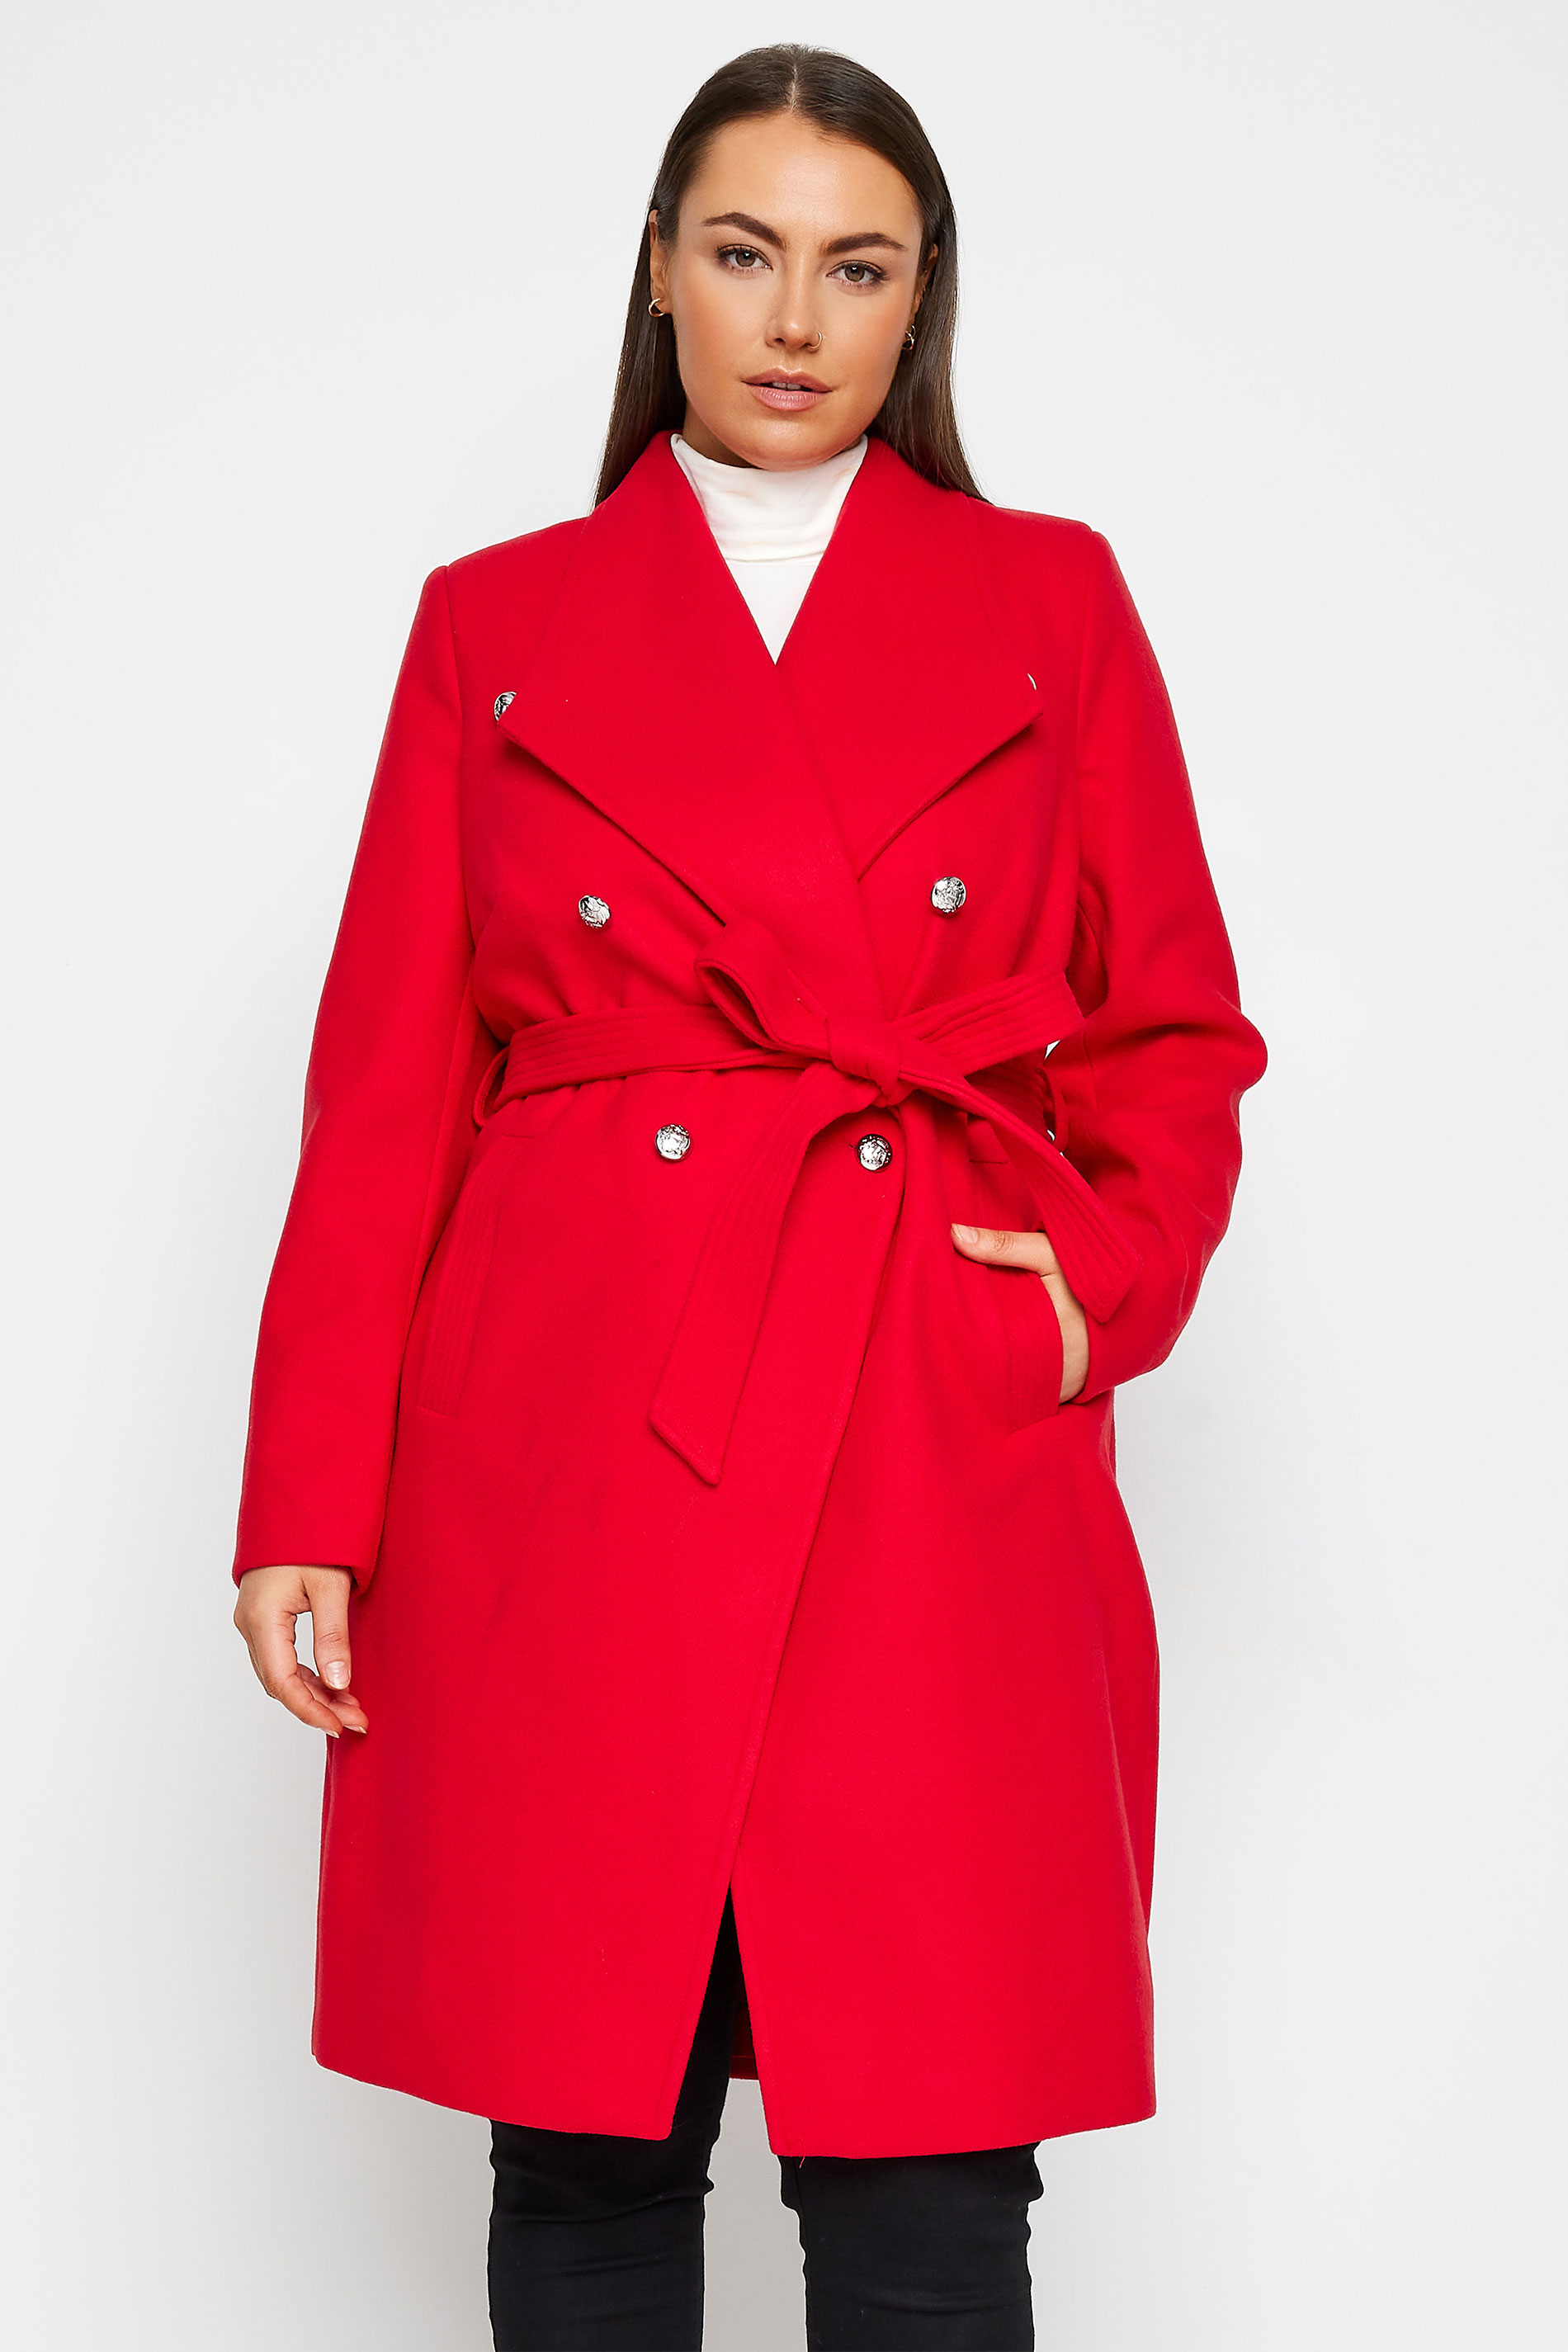 City Chic Red Military Coat 1